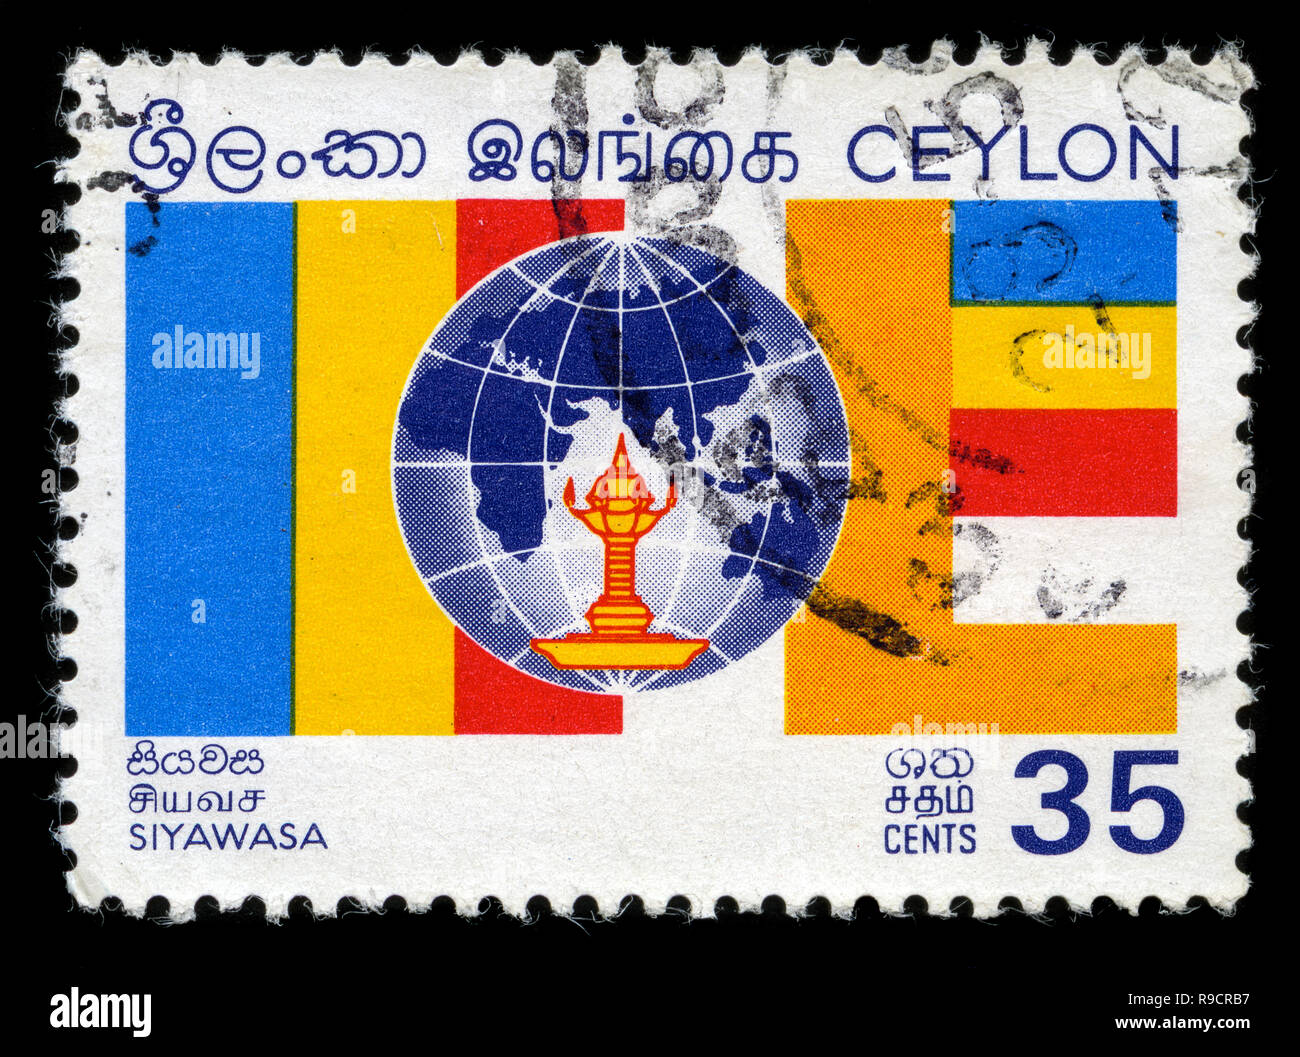 Postal Stamps From USA in Kandy stamp exhibition 11944732 Stock Photo at  Vecteezy